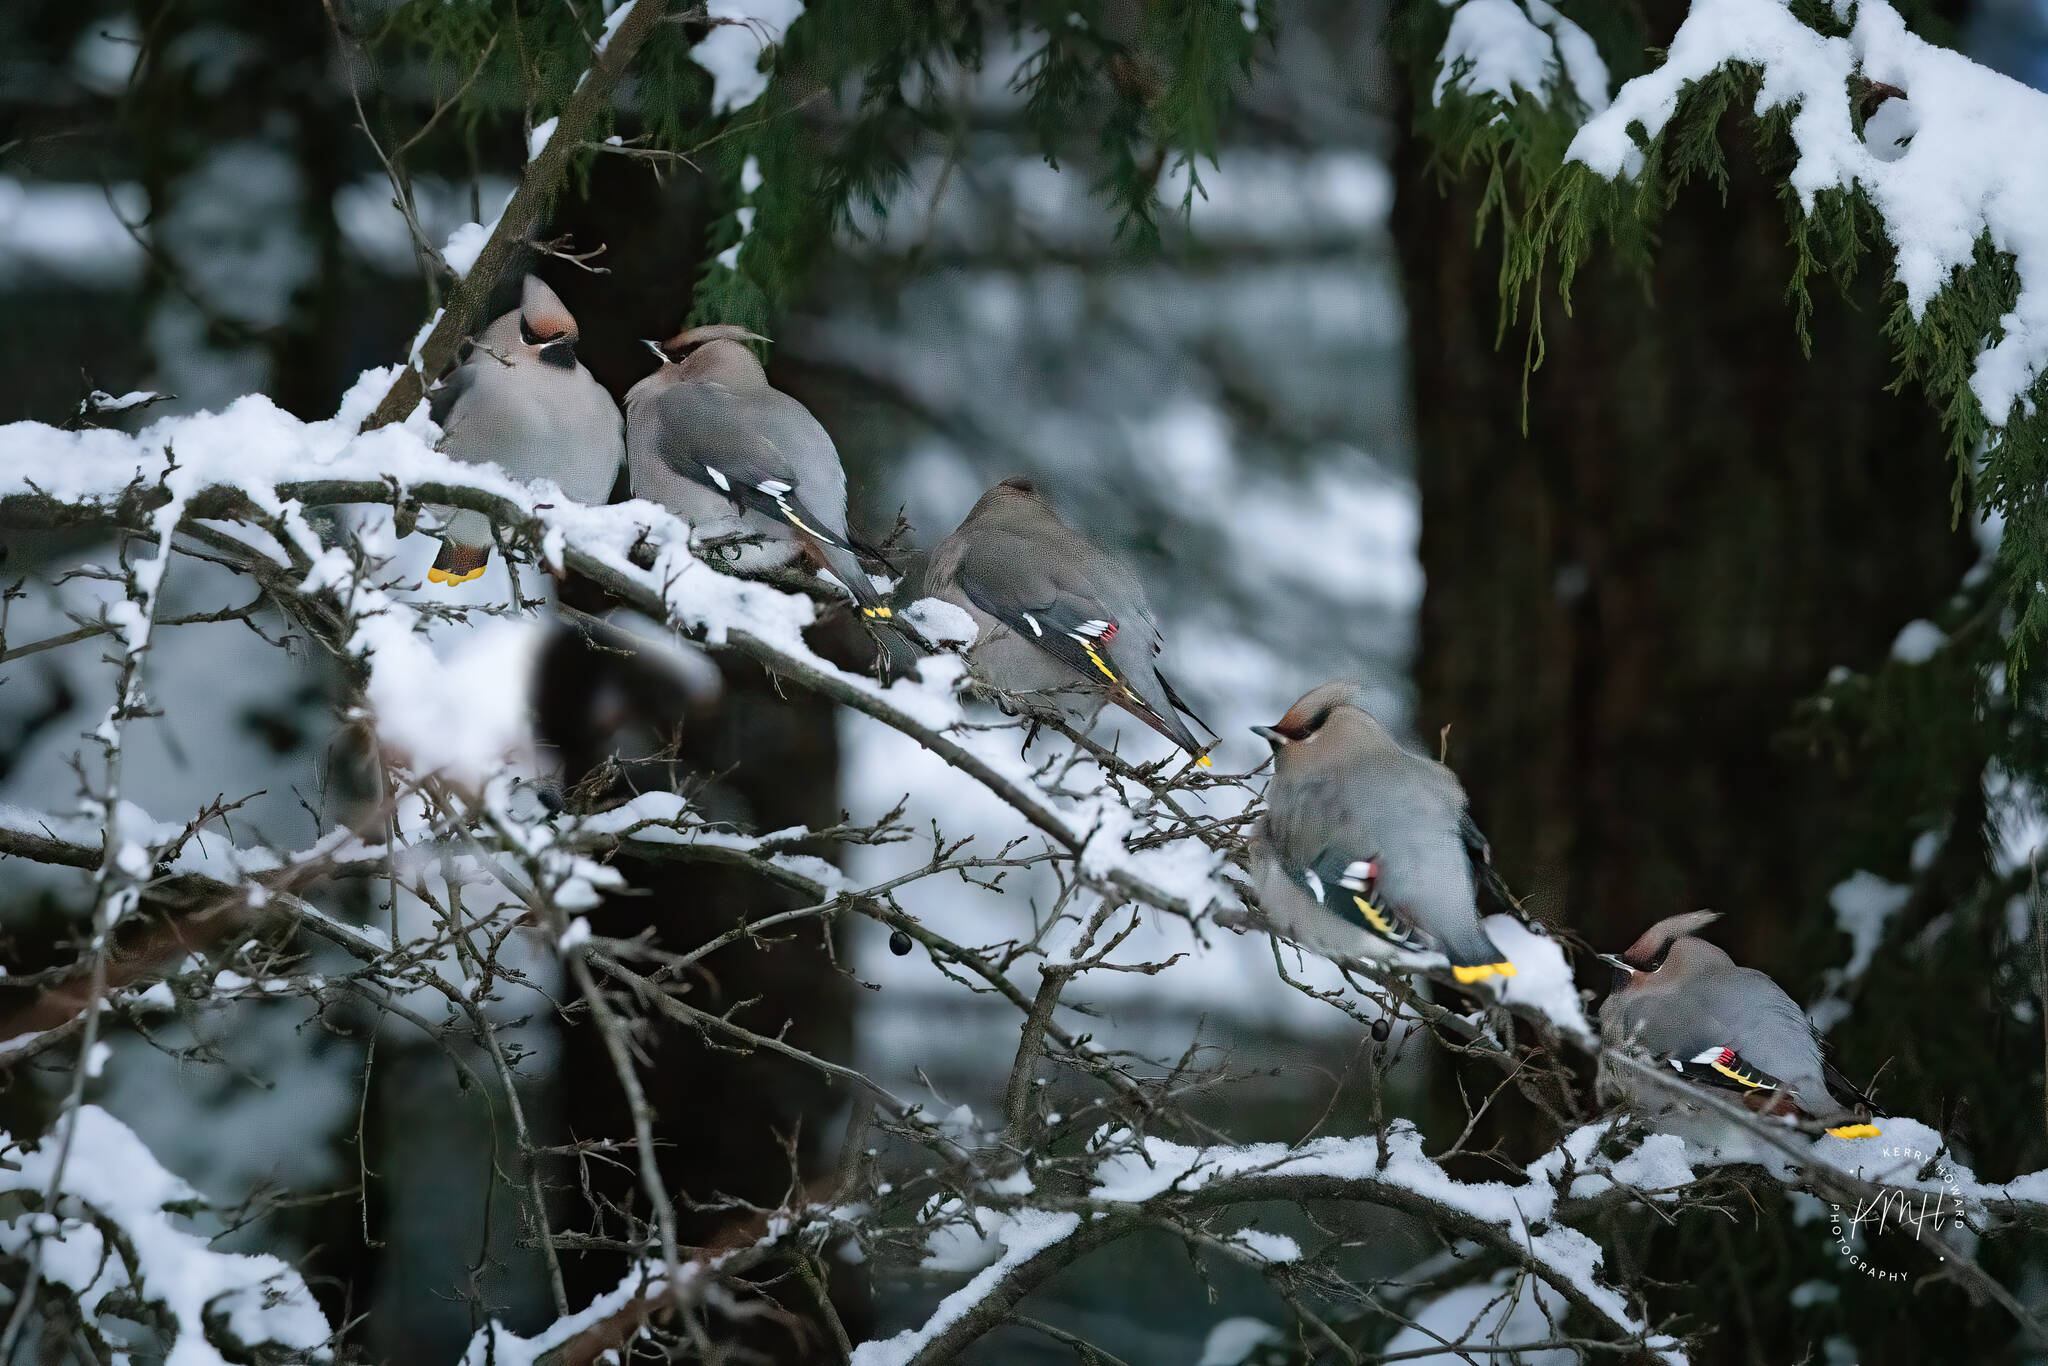 Five Bohemian waxwings rest on a snowy branch between bouts of feeding. (Courtesy Photo / Kerry Howard)